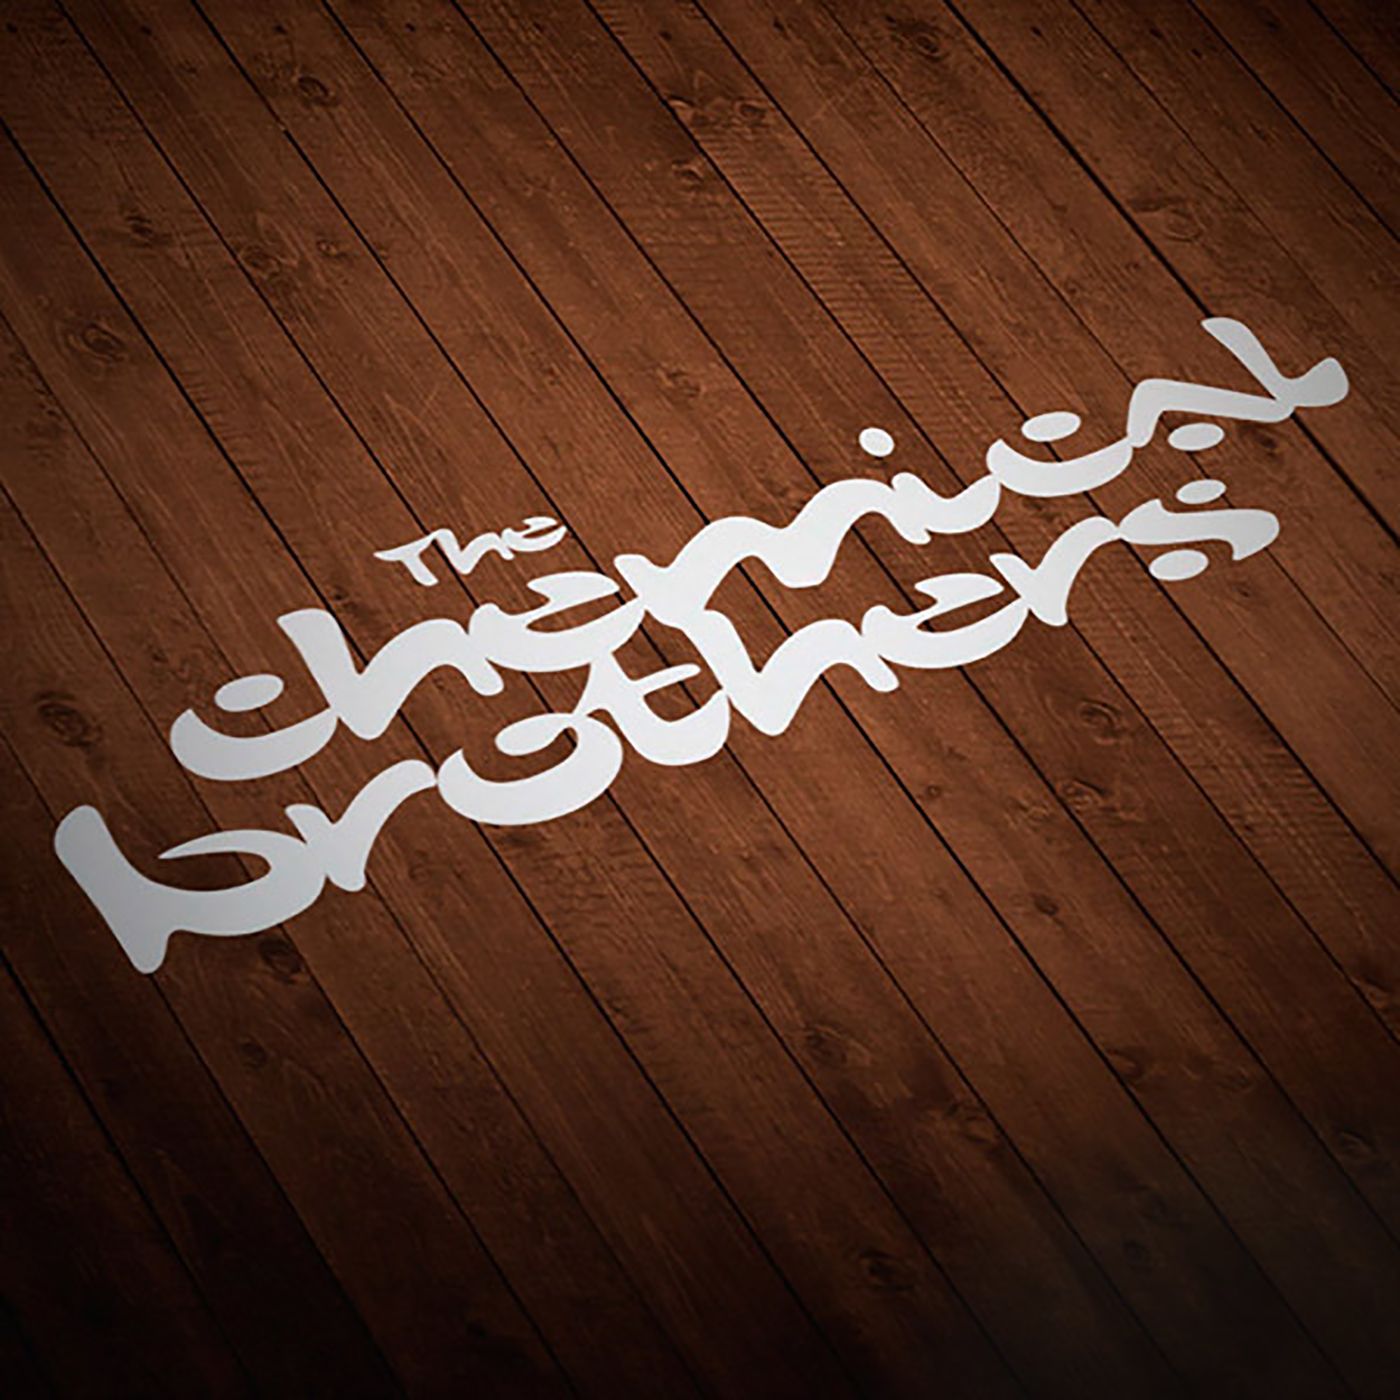 082 The Chemical Brothers - Princess and Infanta